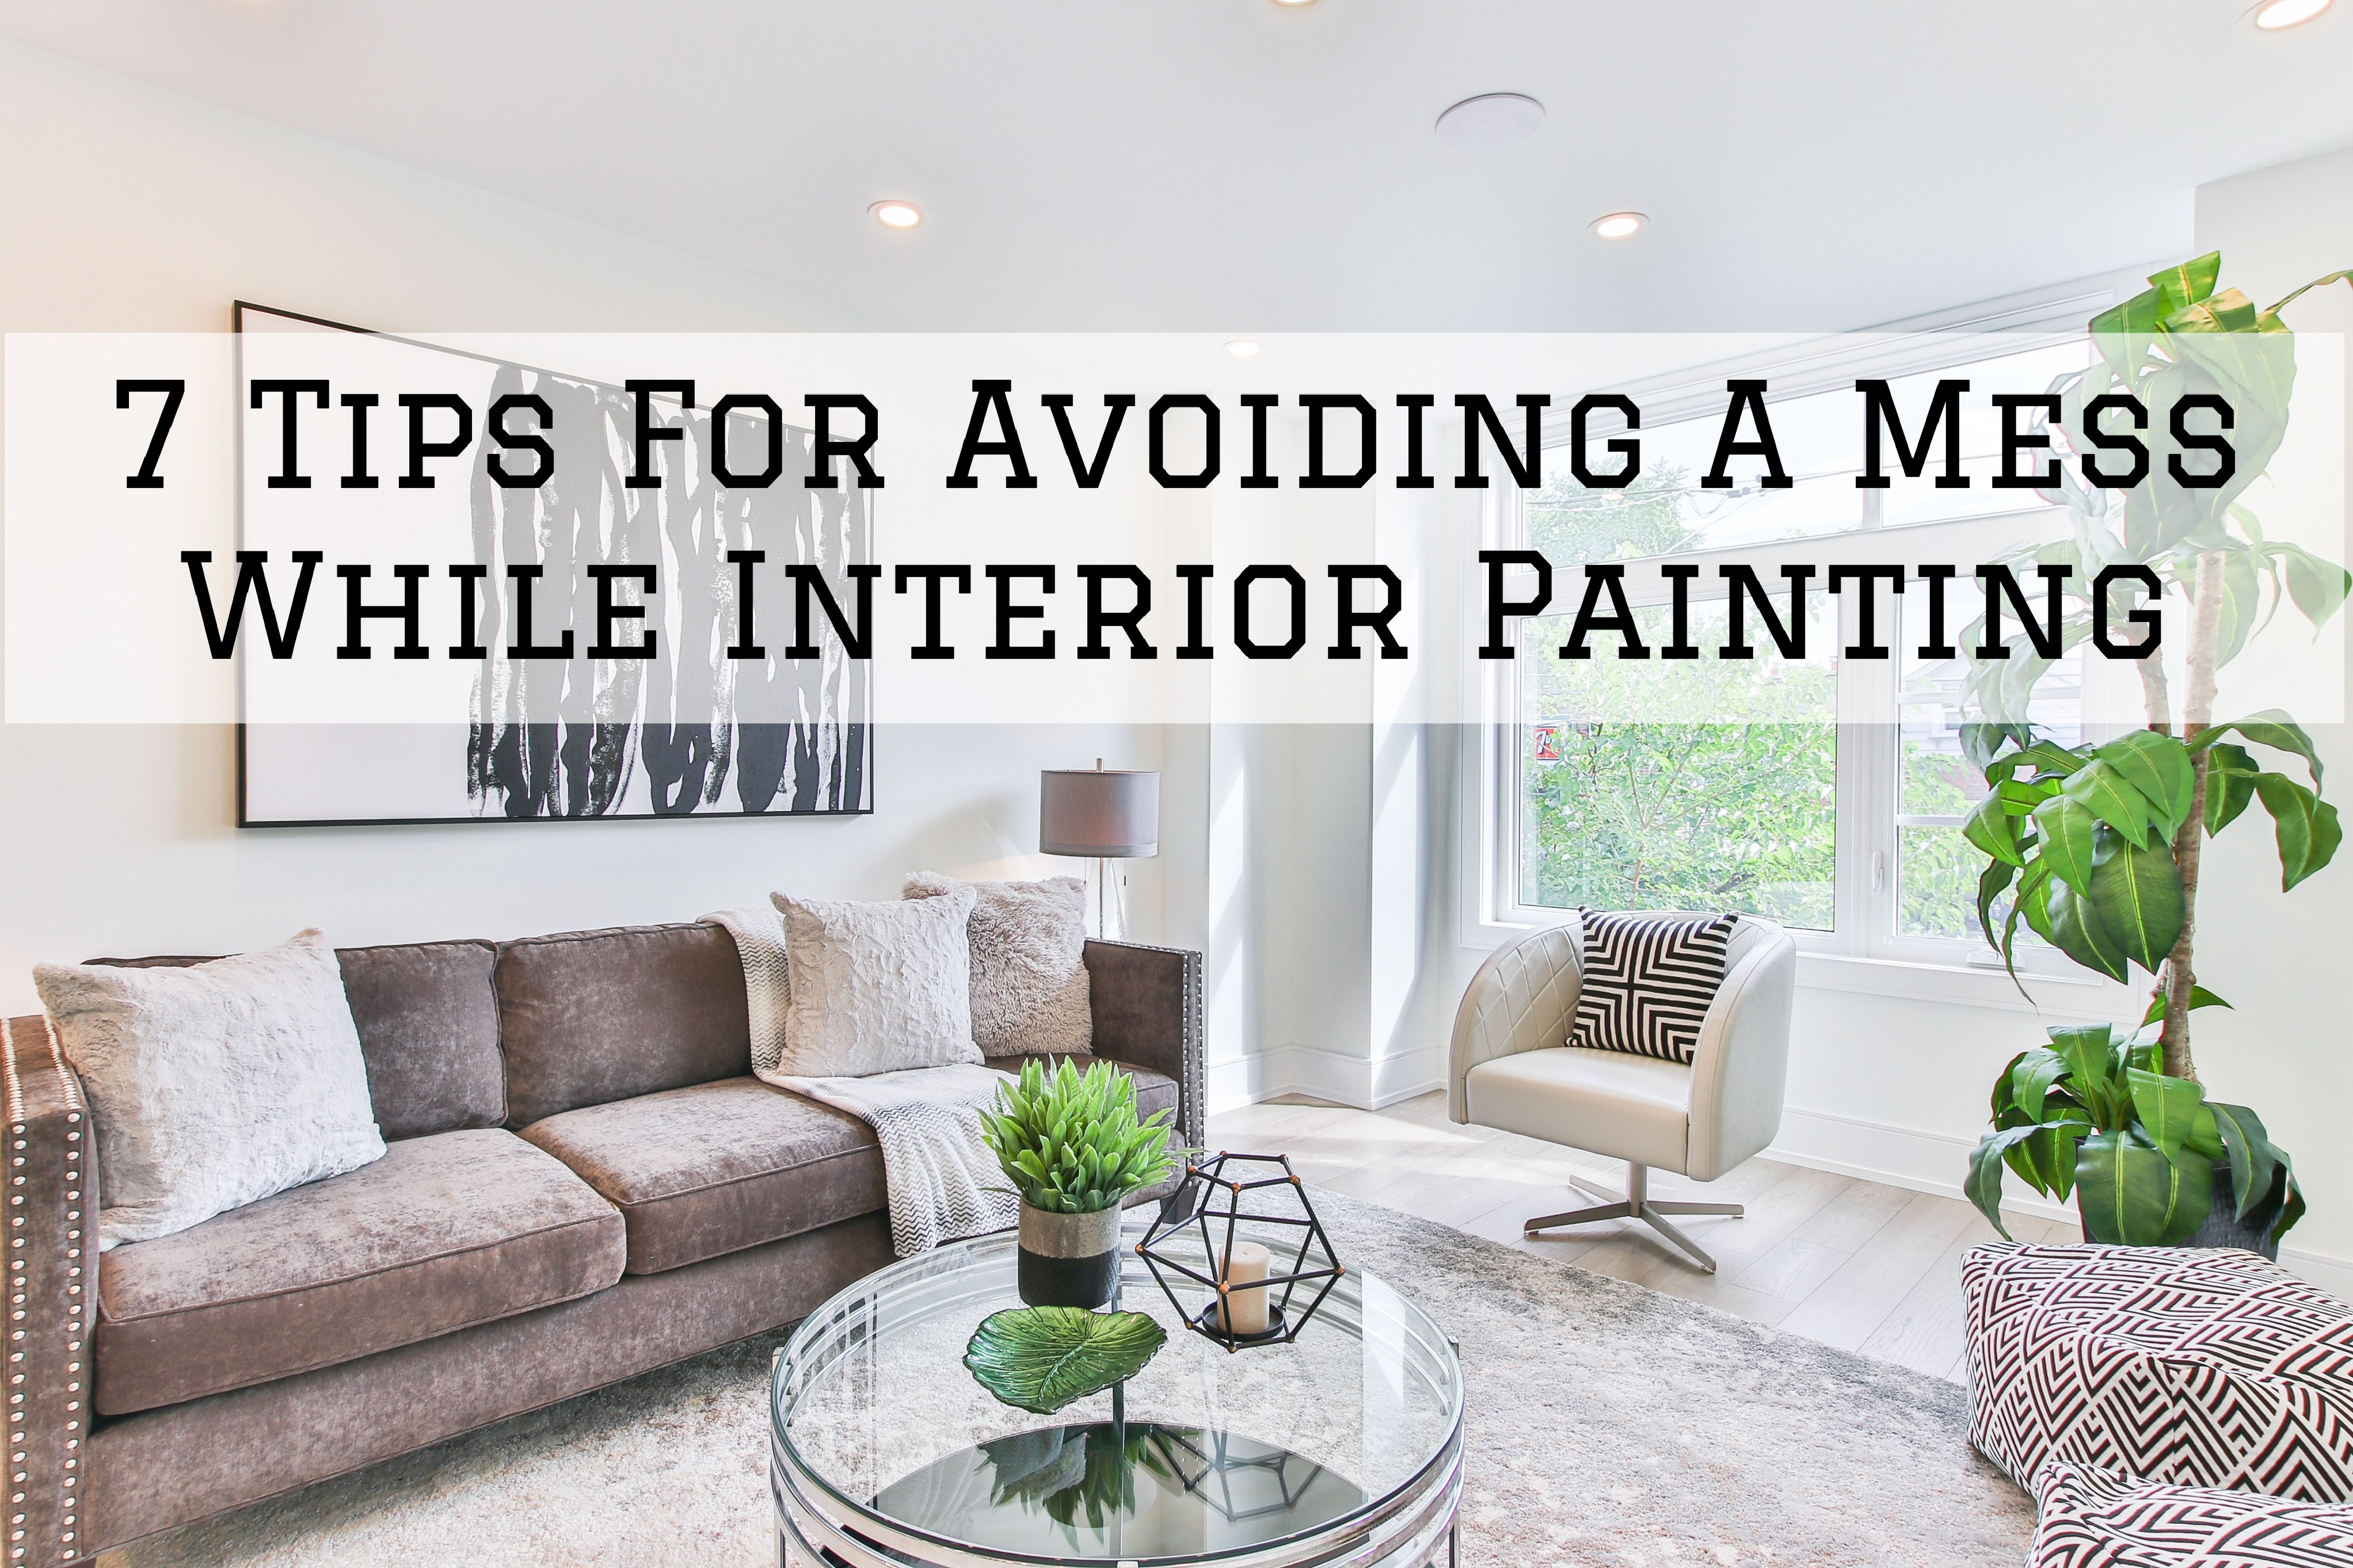 7 Tips For Avoiding A Mess While Interior Painting in Ottawa, Ontario